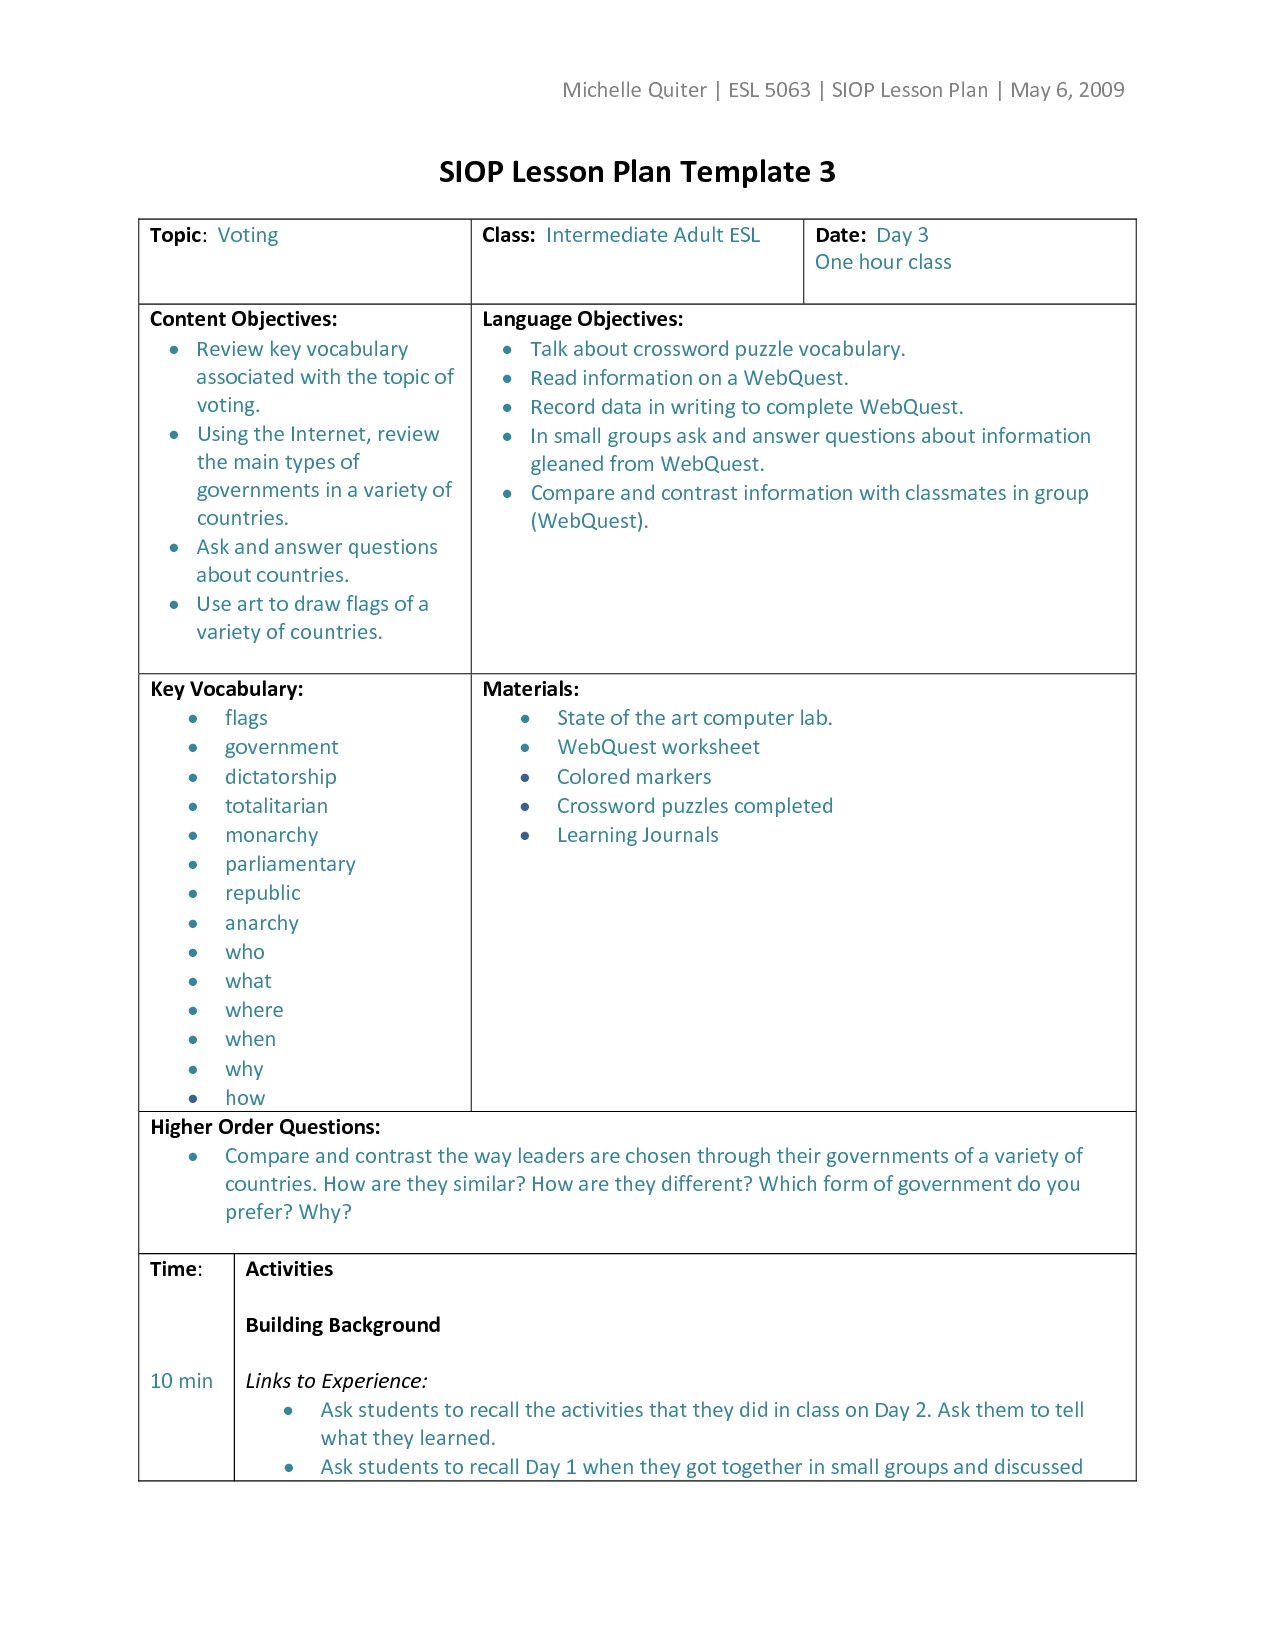 siop lesson plan template